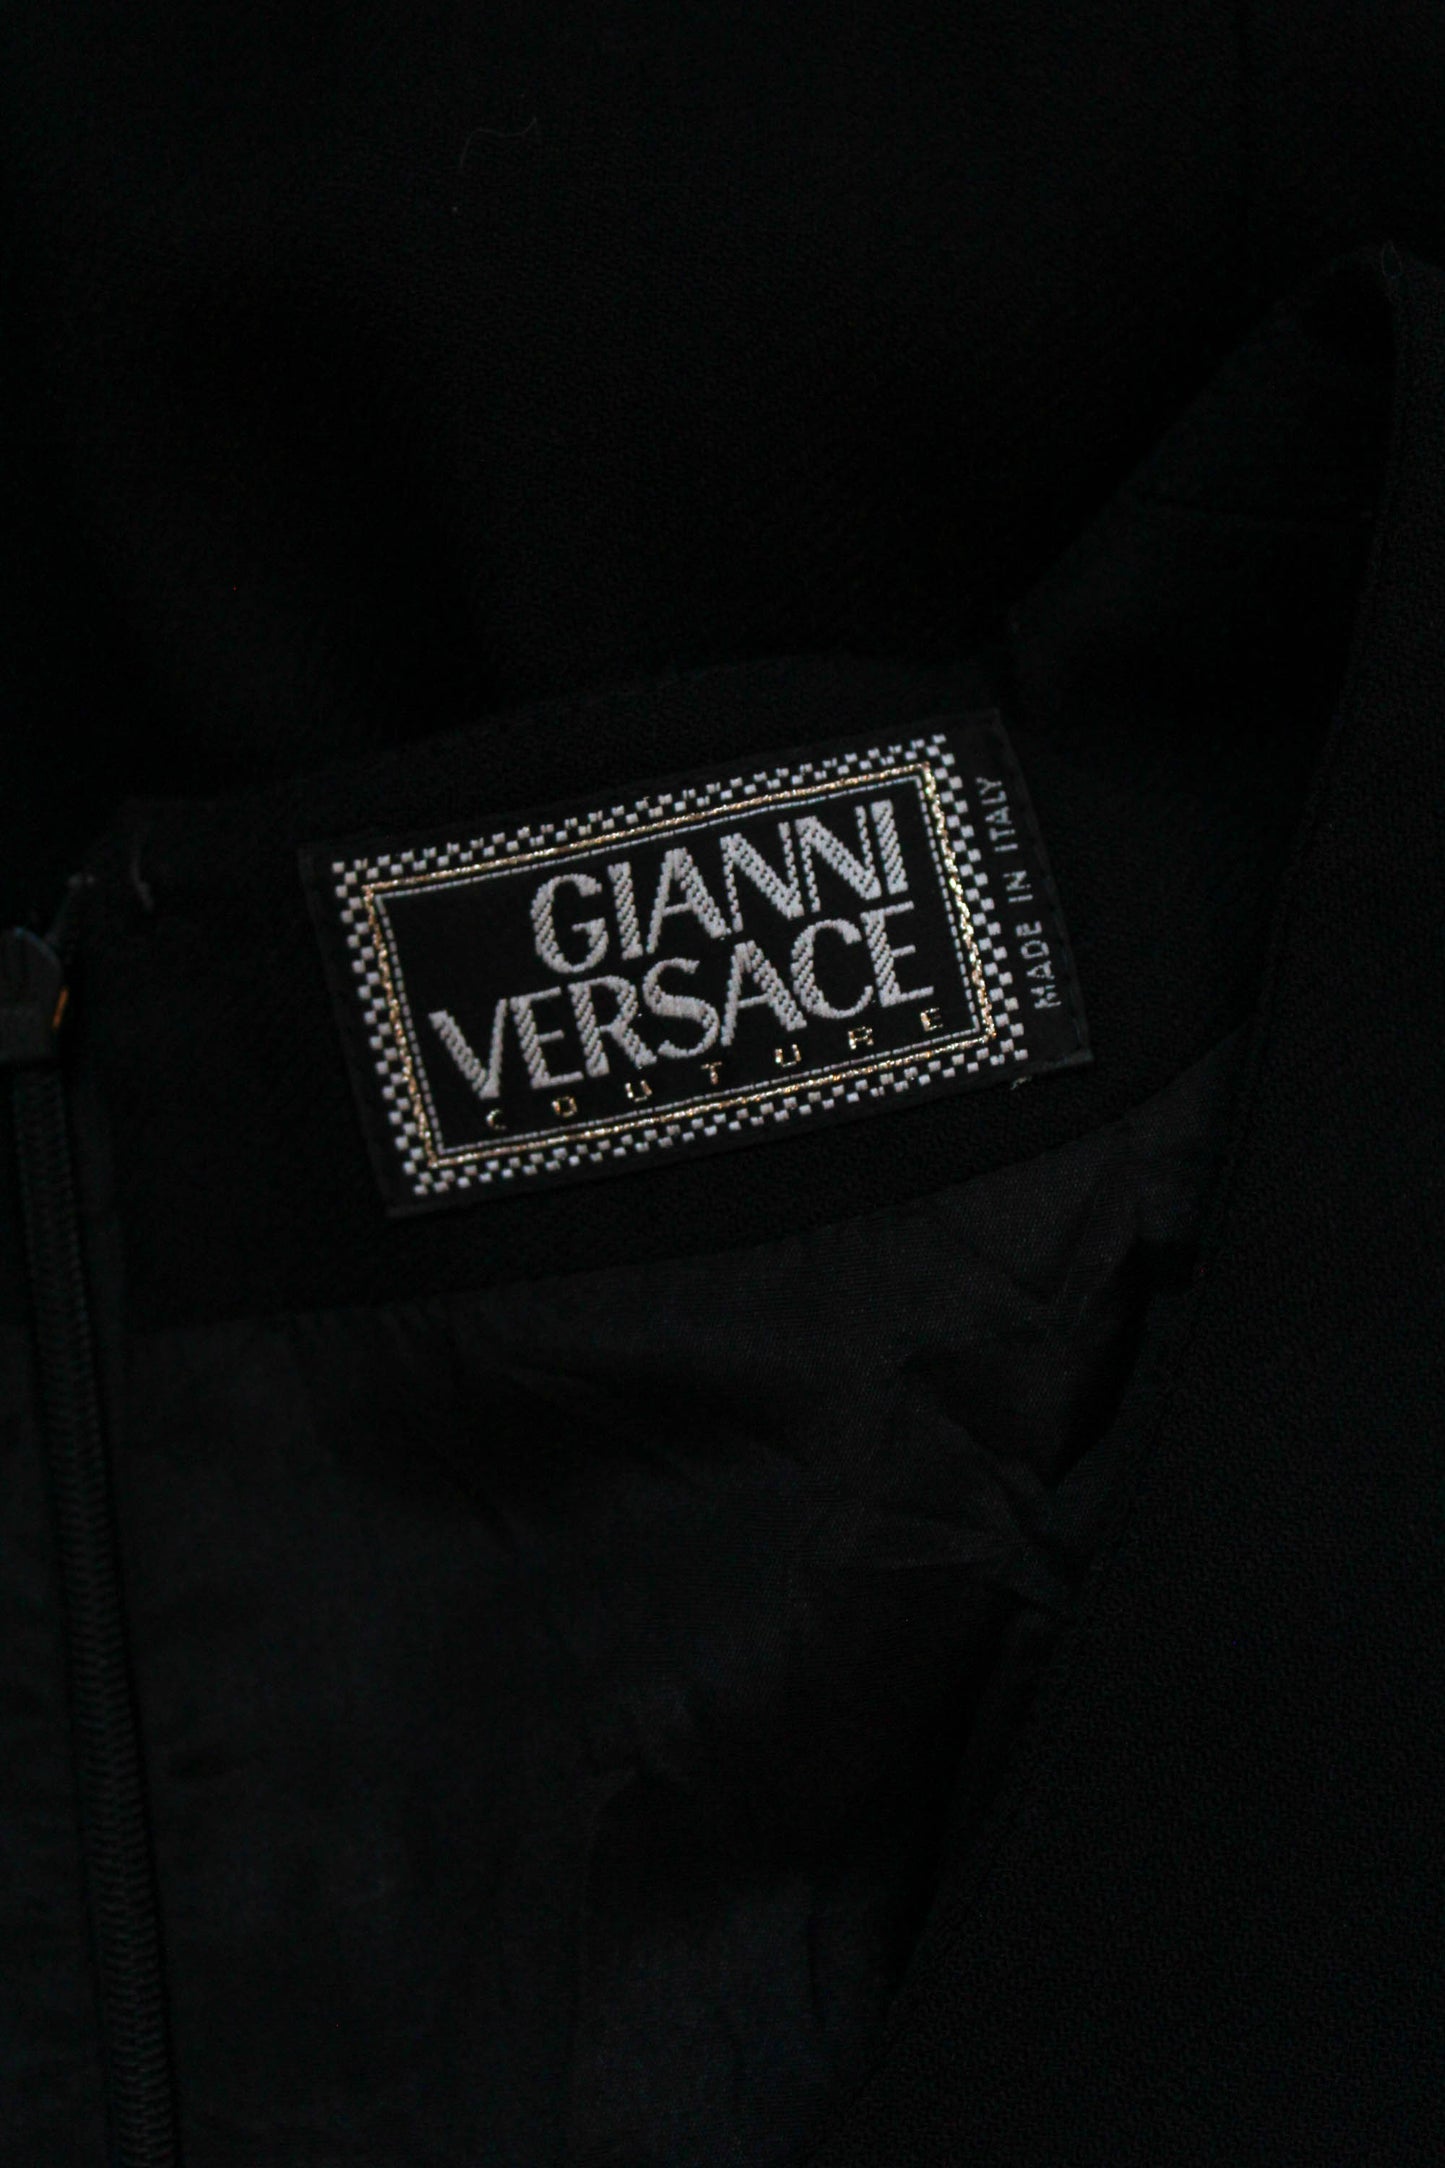 Gianni Versace Black Dress with Medallion Details, Small